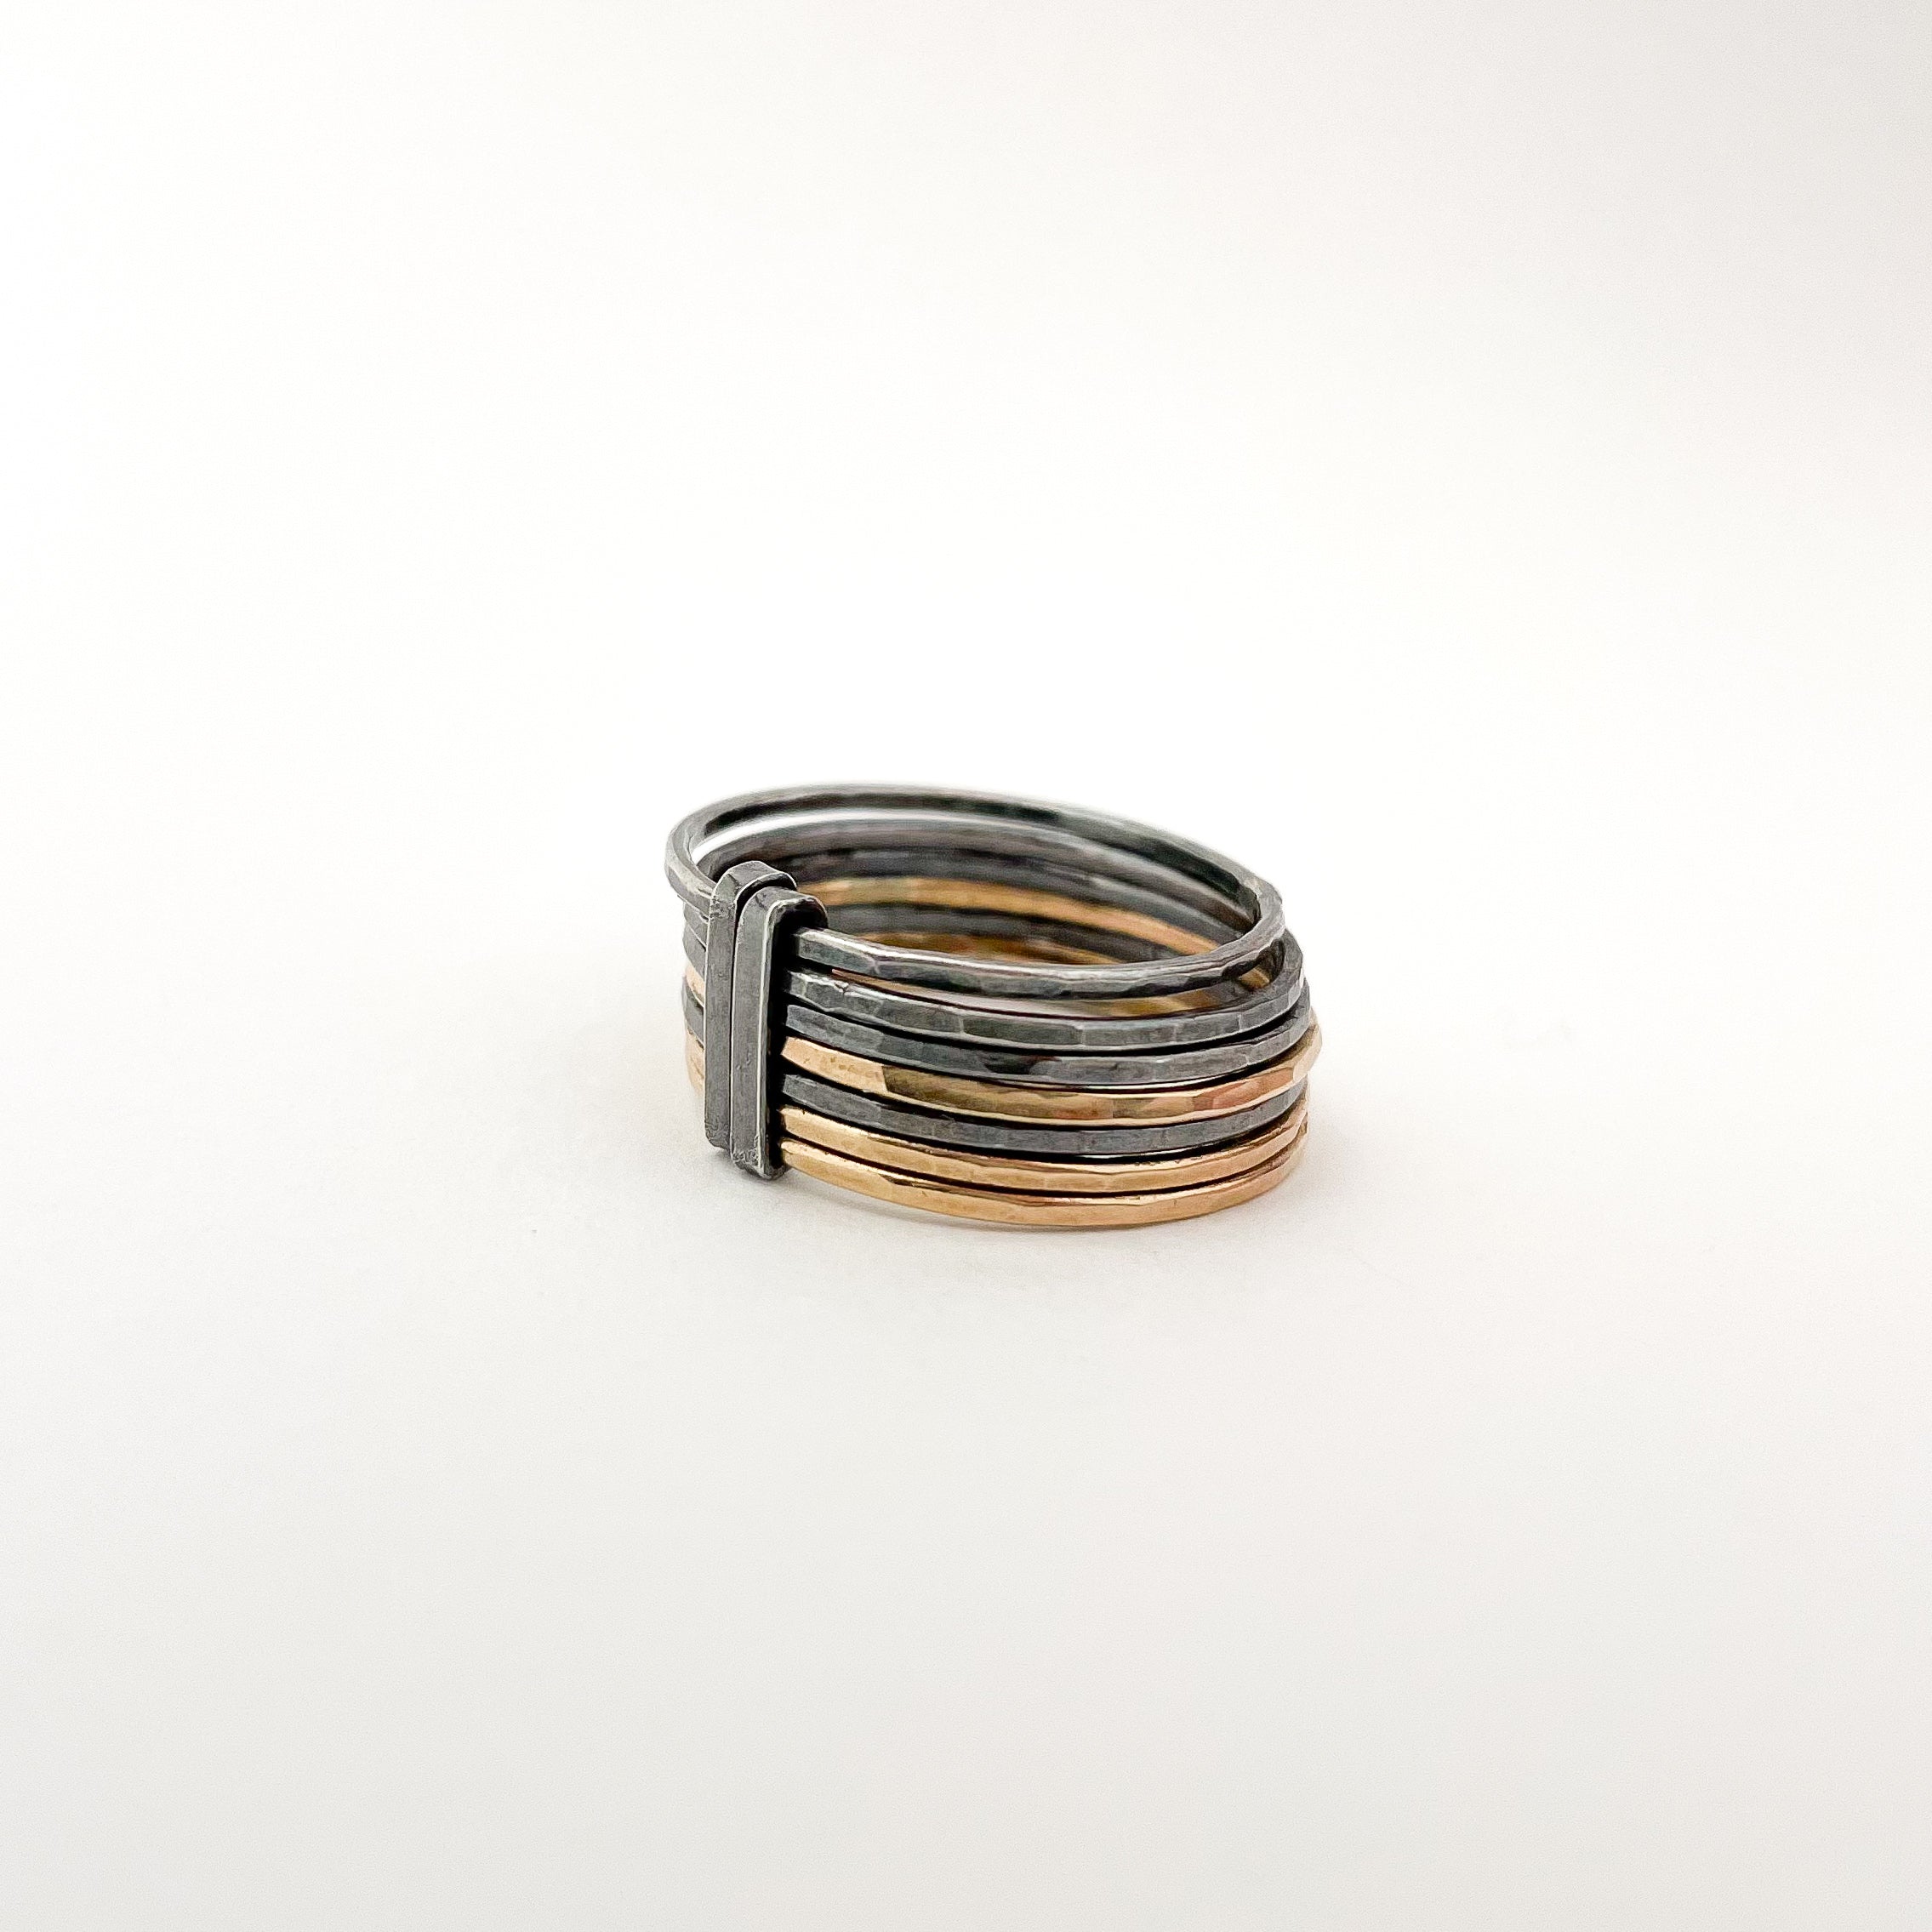 STERLING SILVER & 14K GOLD FILLED STACKED RING